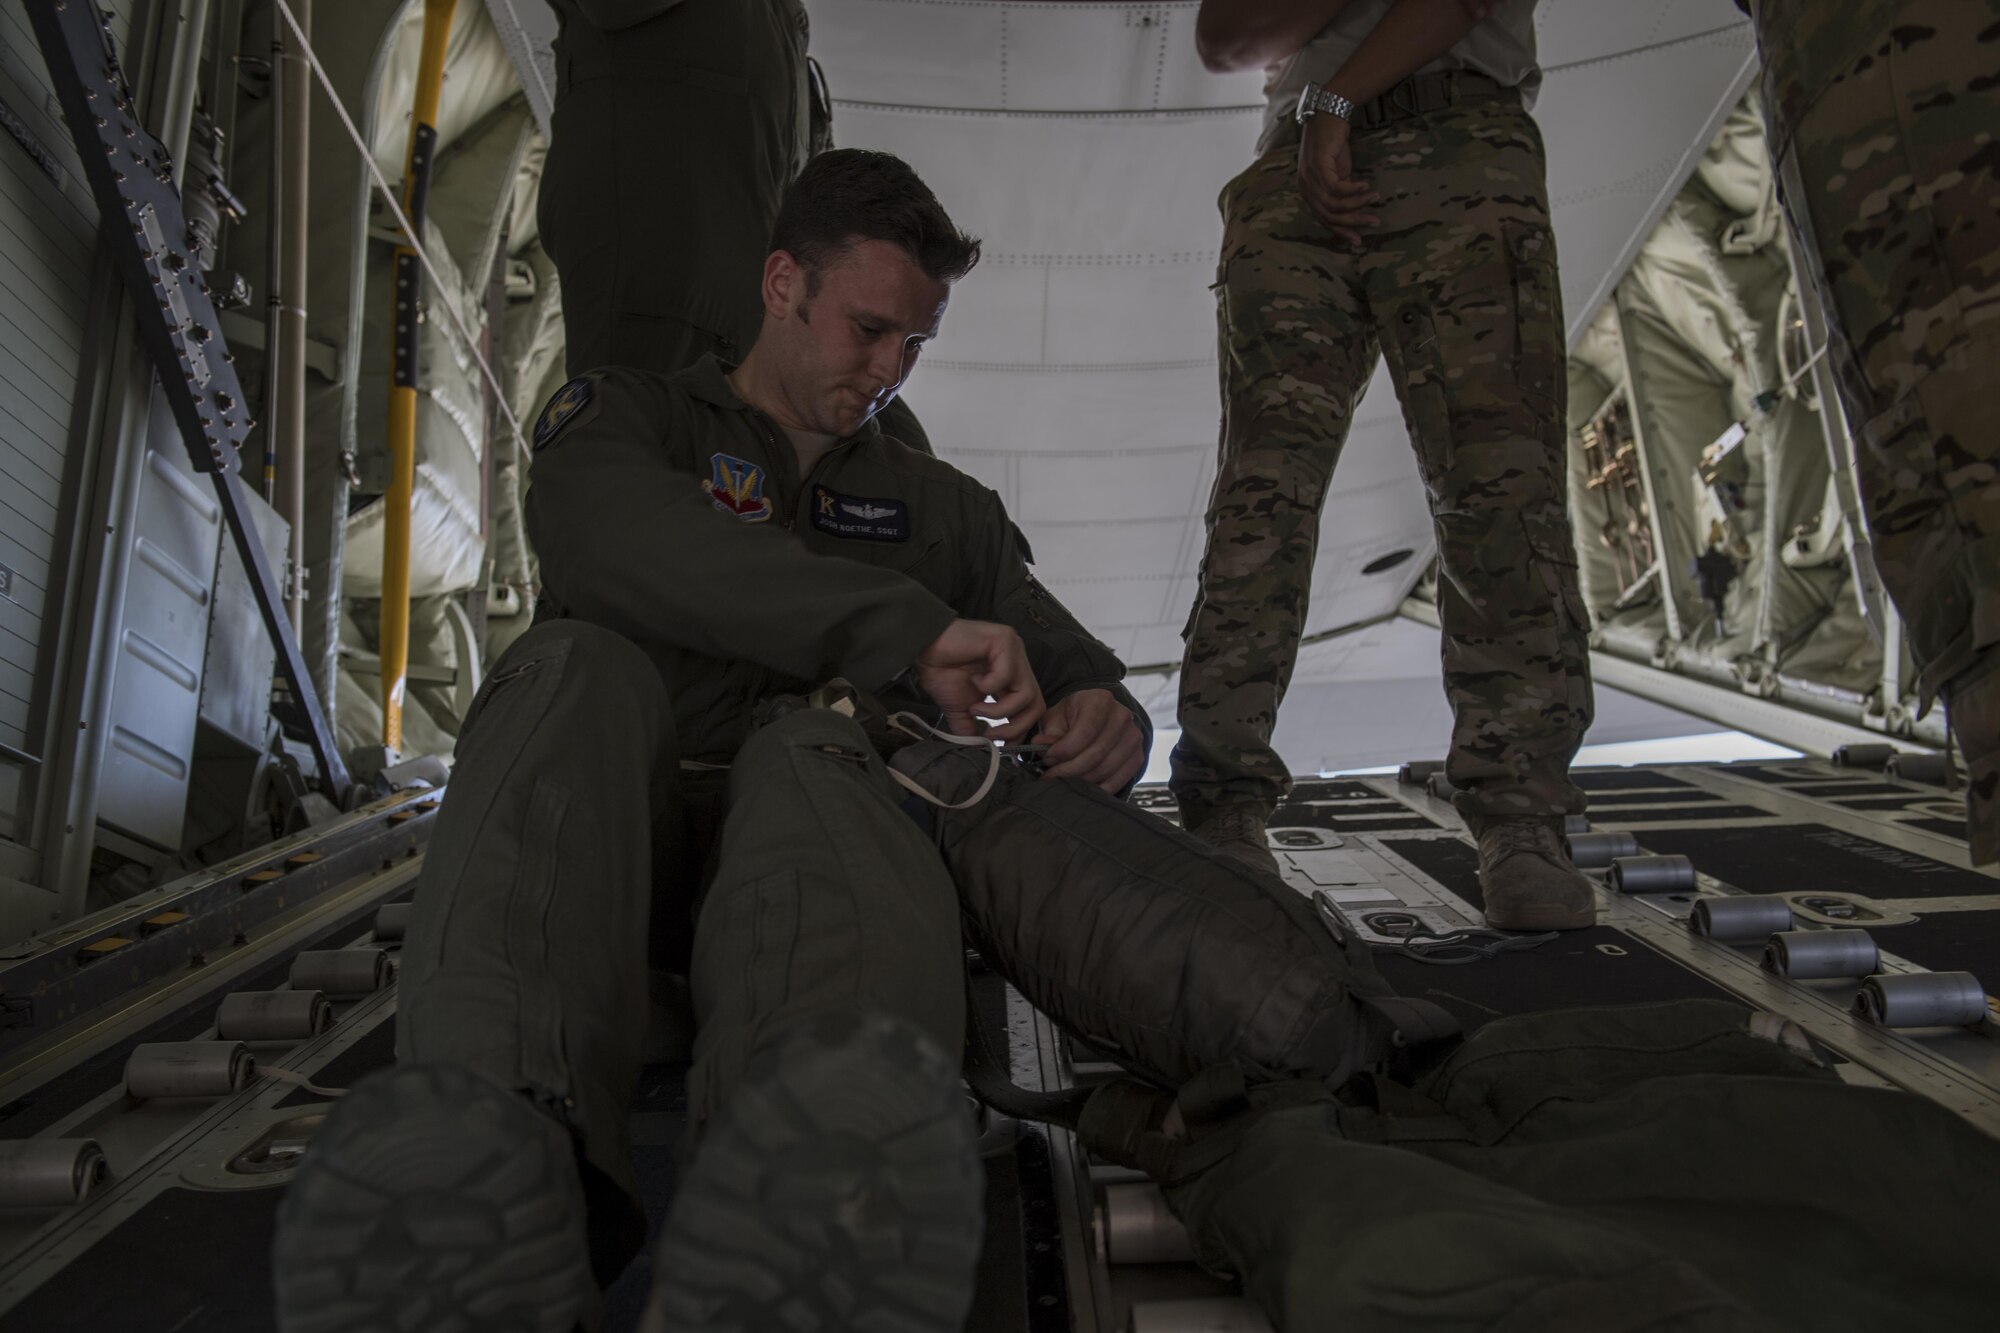 Staff Sgt. Josh Noethe, 71st Rescue Squadron loadmaster, checks a parachute on a training bundle, April 18, 2017, at Moody Air Force Base, Ga. The training bundle weighed approximately 3,000 pounds and is designed to simulate a heavy equipment air drop. This training helps the 71st RQS remain ready to provide rapidly deployable, expeditionary personnel recovery forces to theater commanders for contingency response operations worldwide. (U.S. Air Force photo by Tech. Sgt. Zachary Wolf)